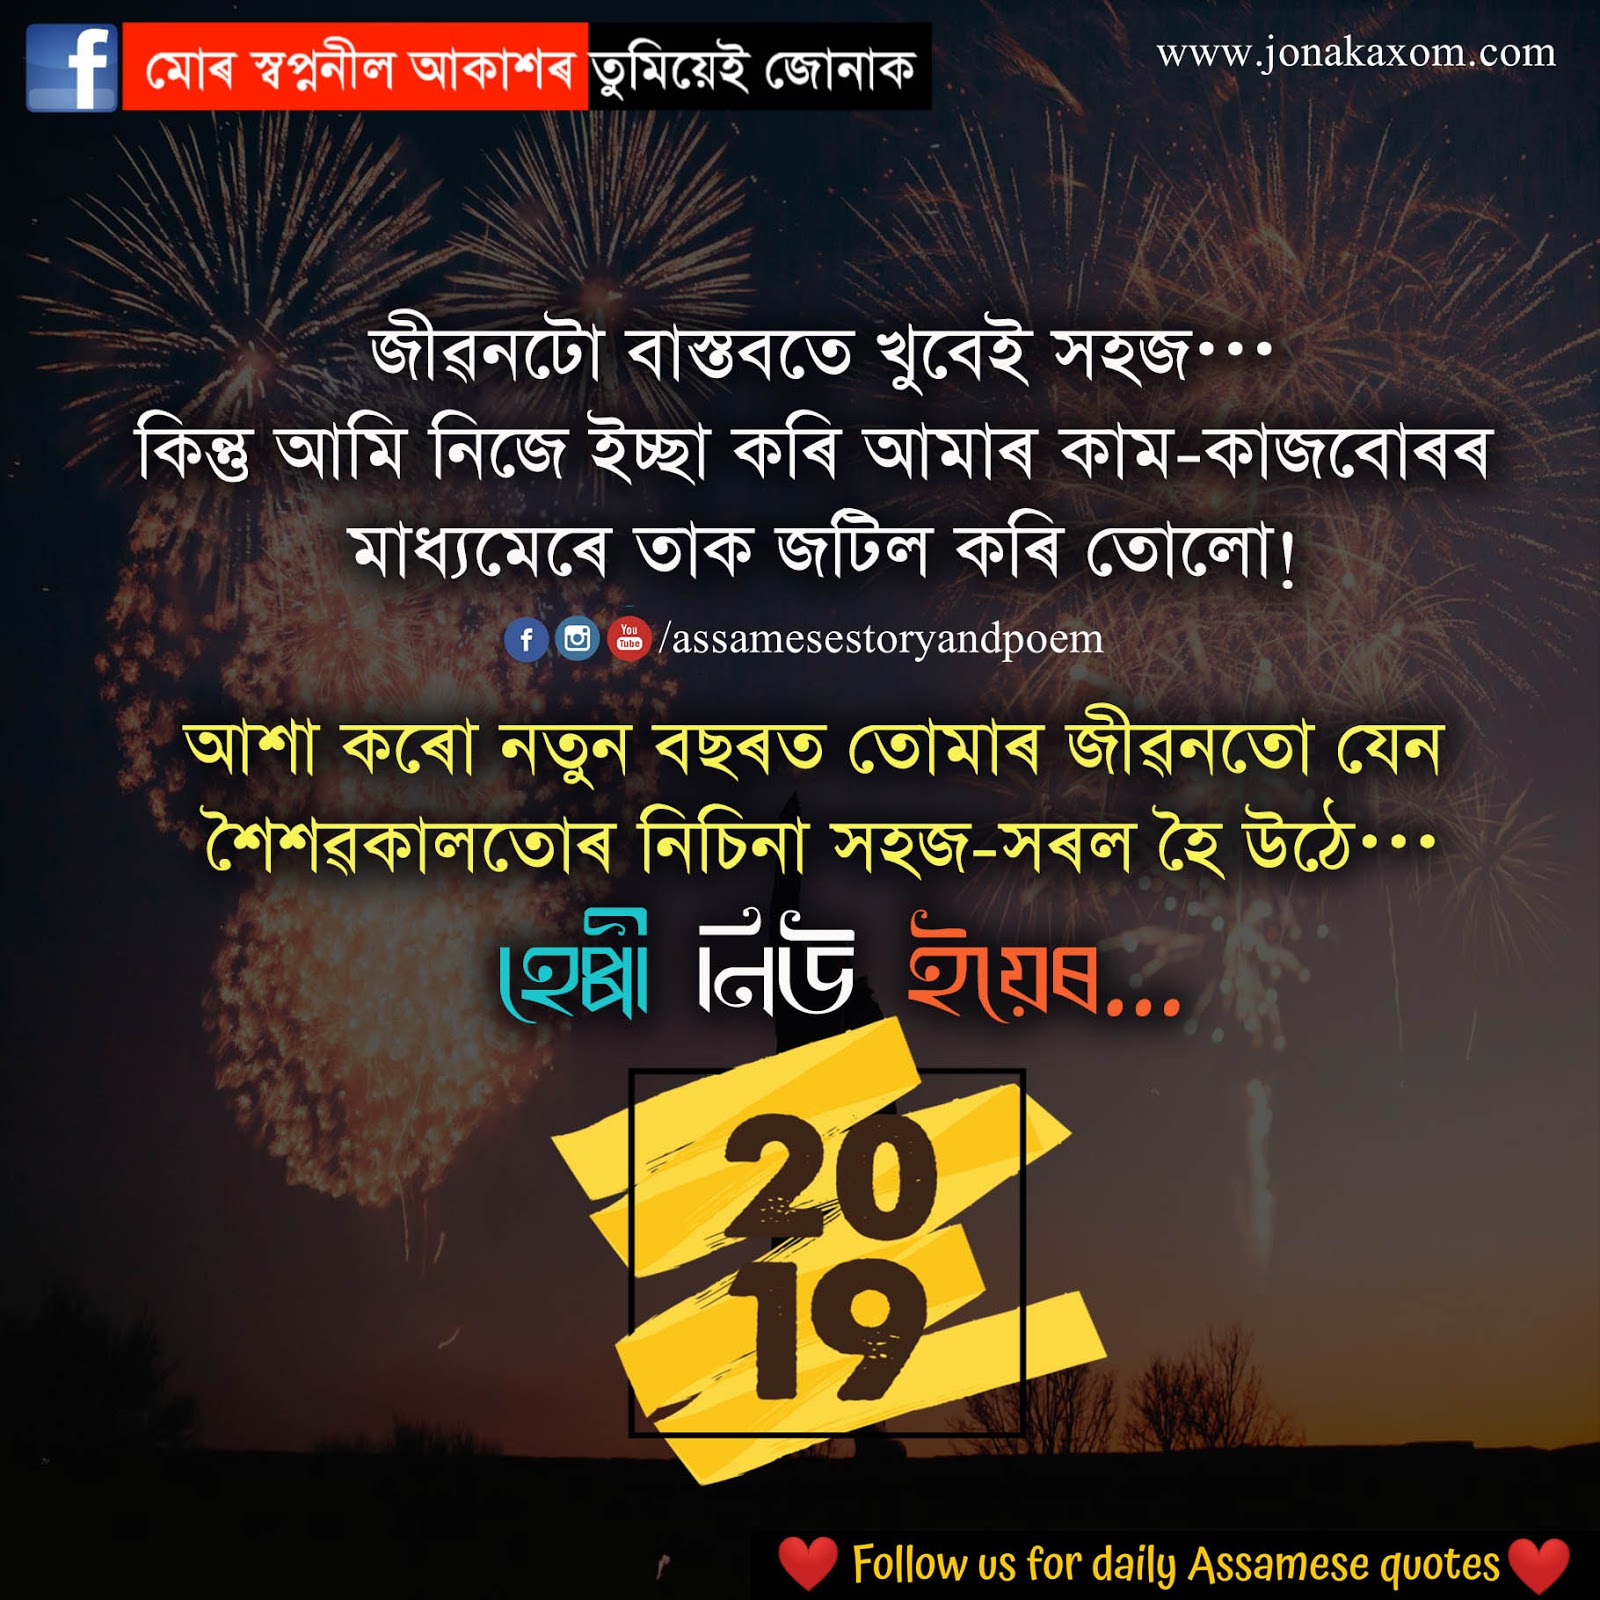 happy new year 2019 quotes in assamese